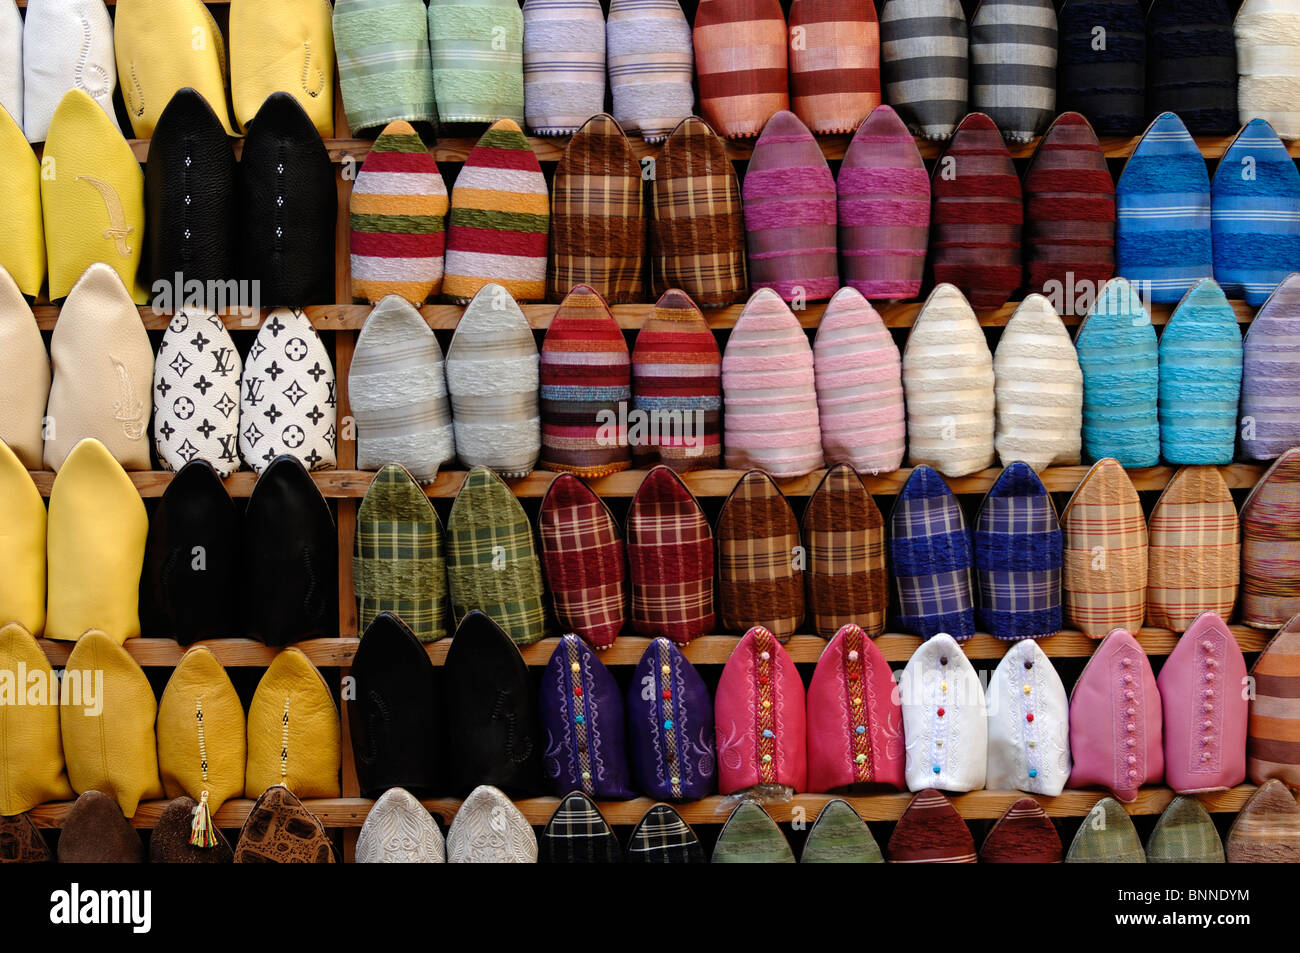 Colourful Pattern or Display of Moroccan Slippers or Babouches on Market Stall in the Medina, or Old Town, Fez, Morocco Stock Photo